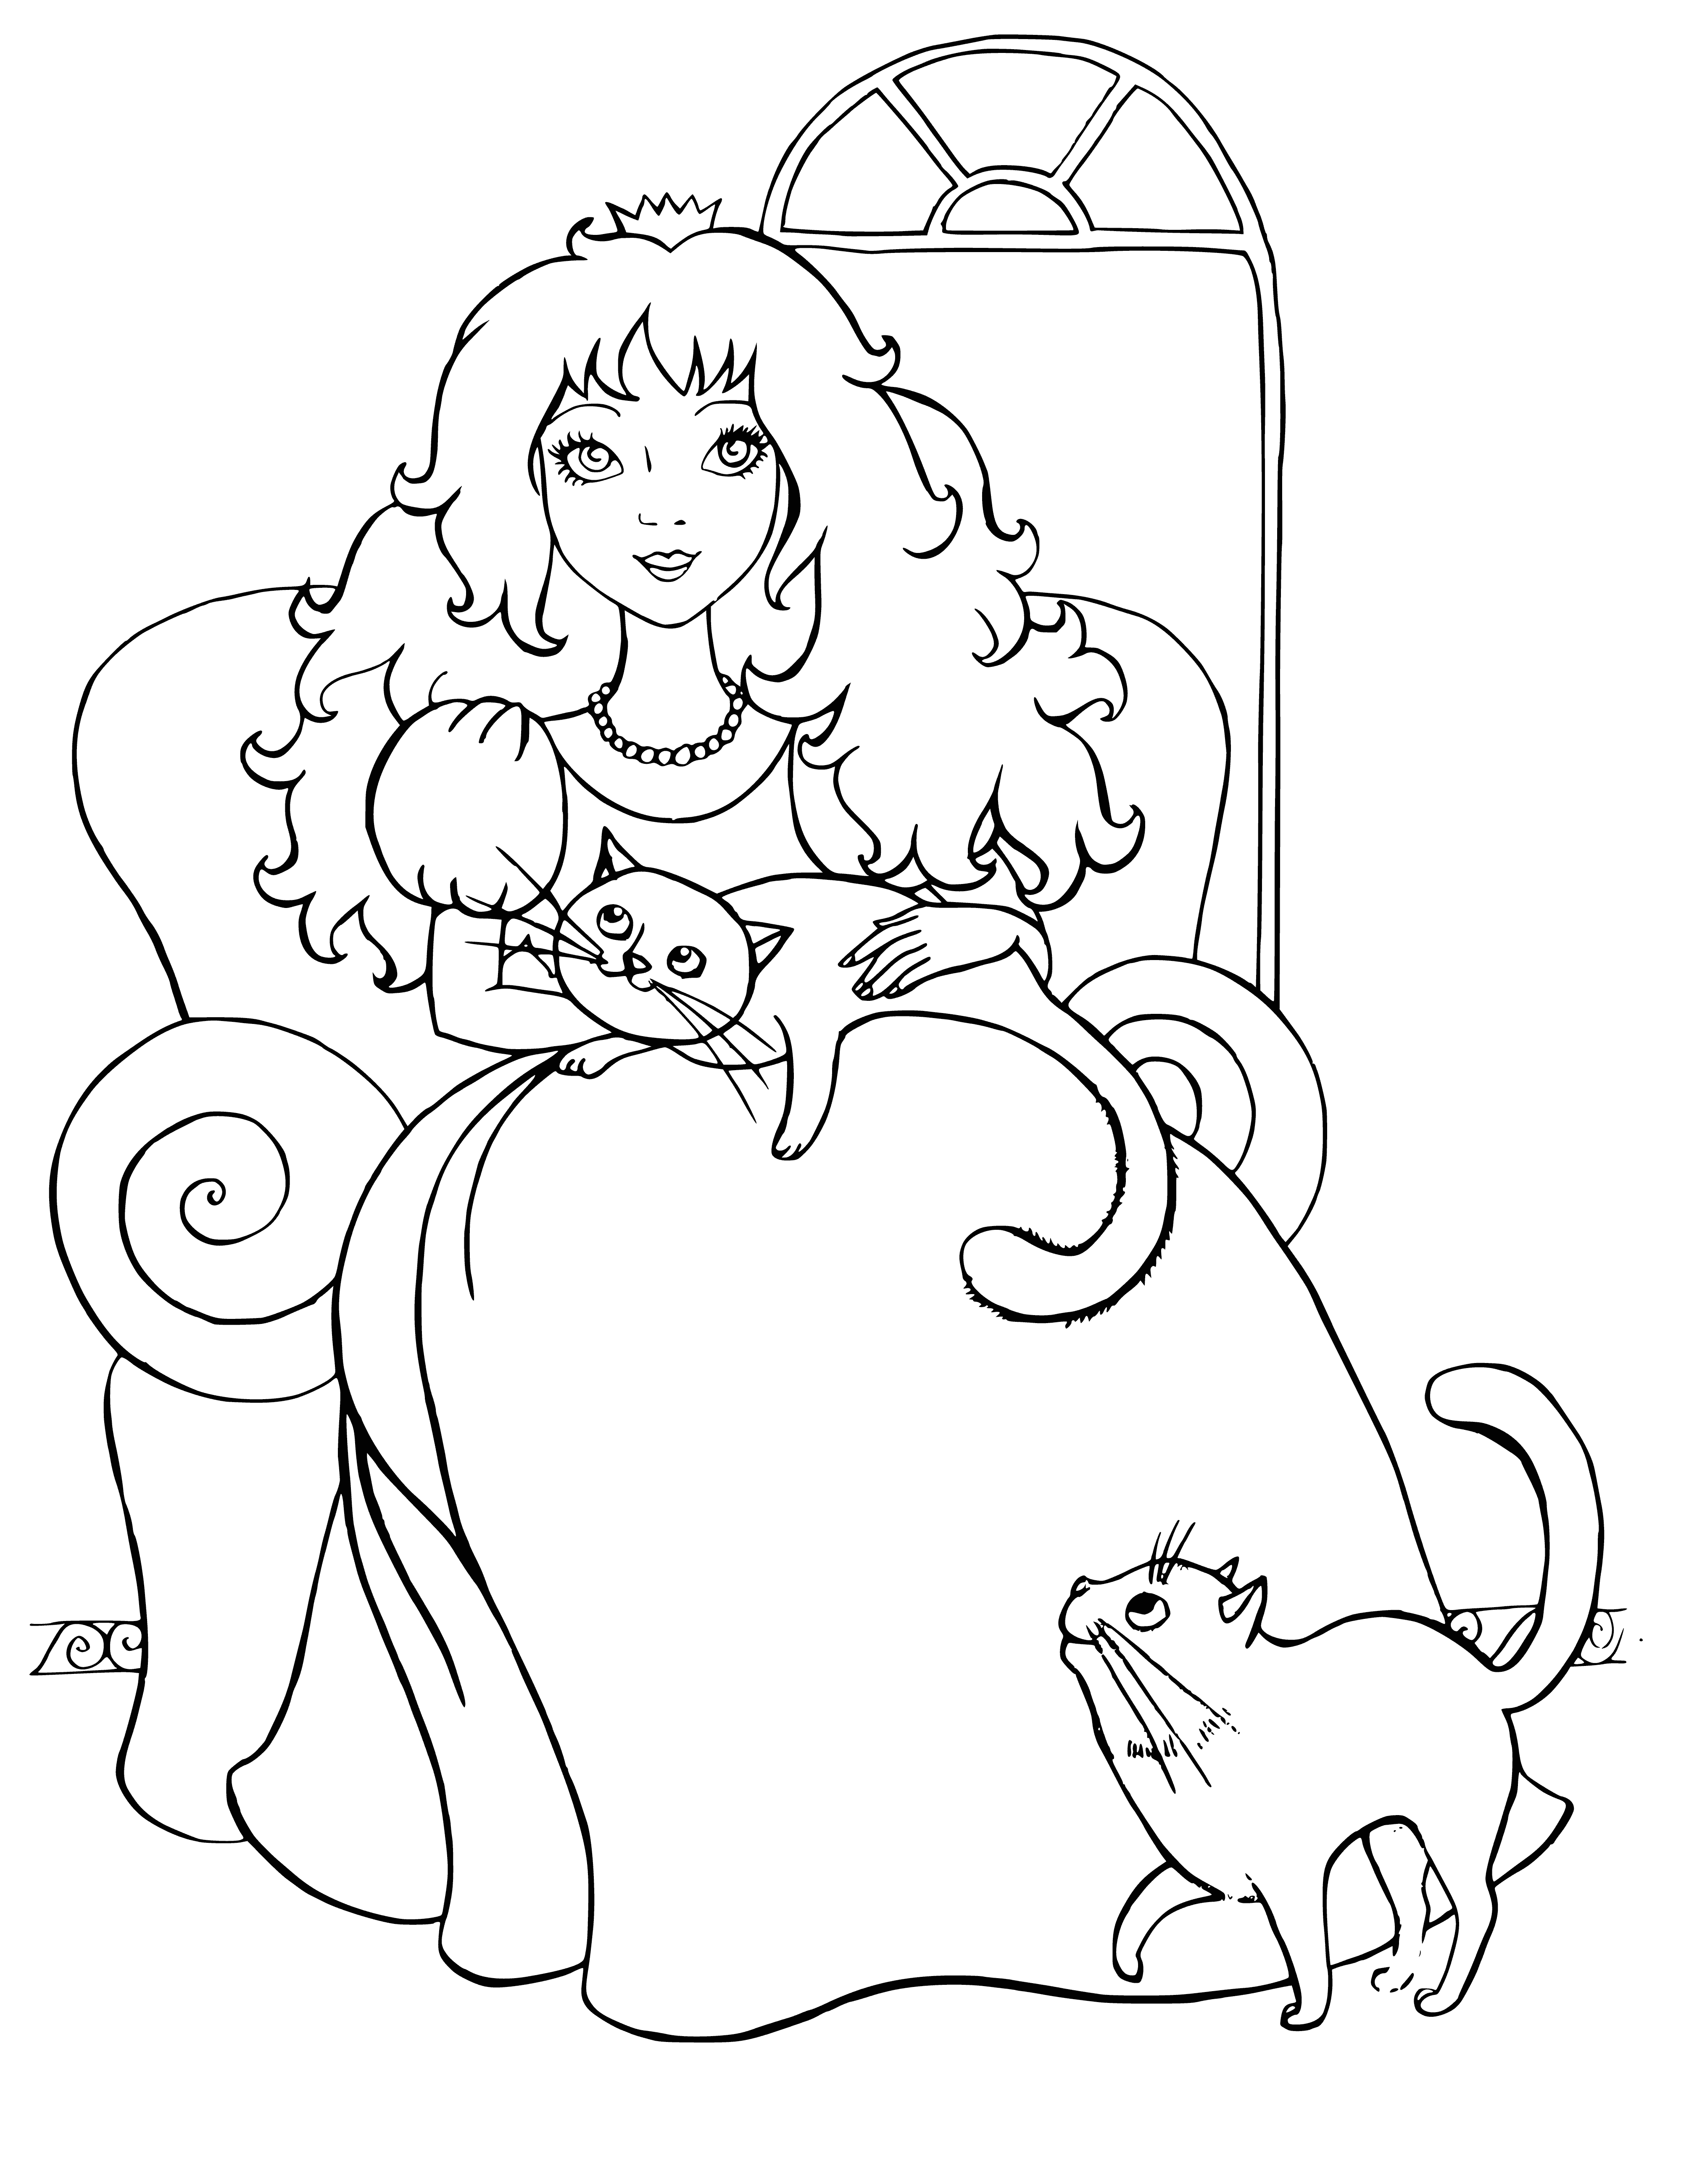 Kittens for the princess coloring page